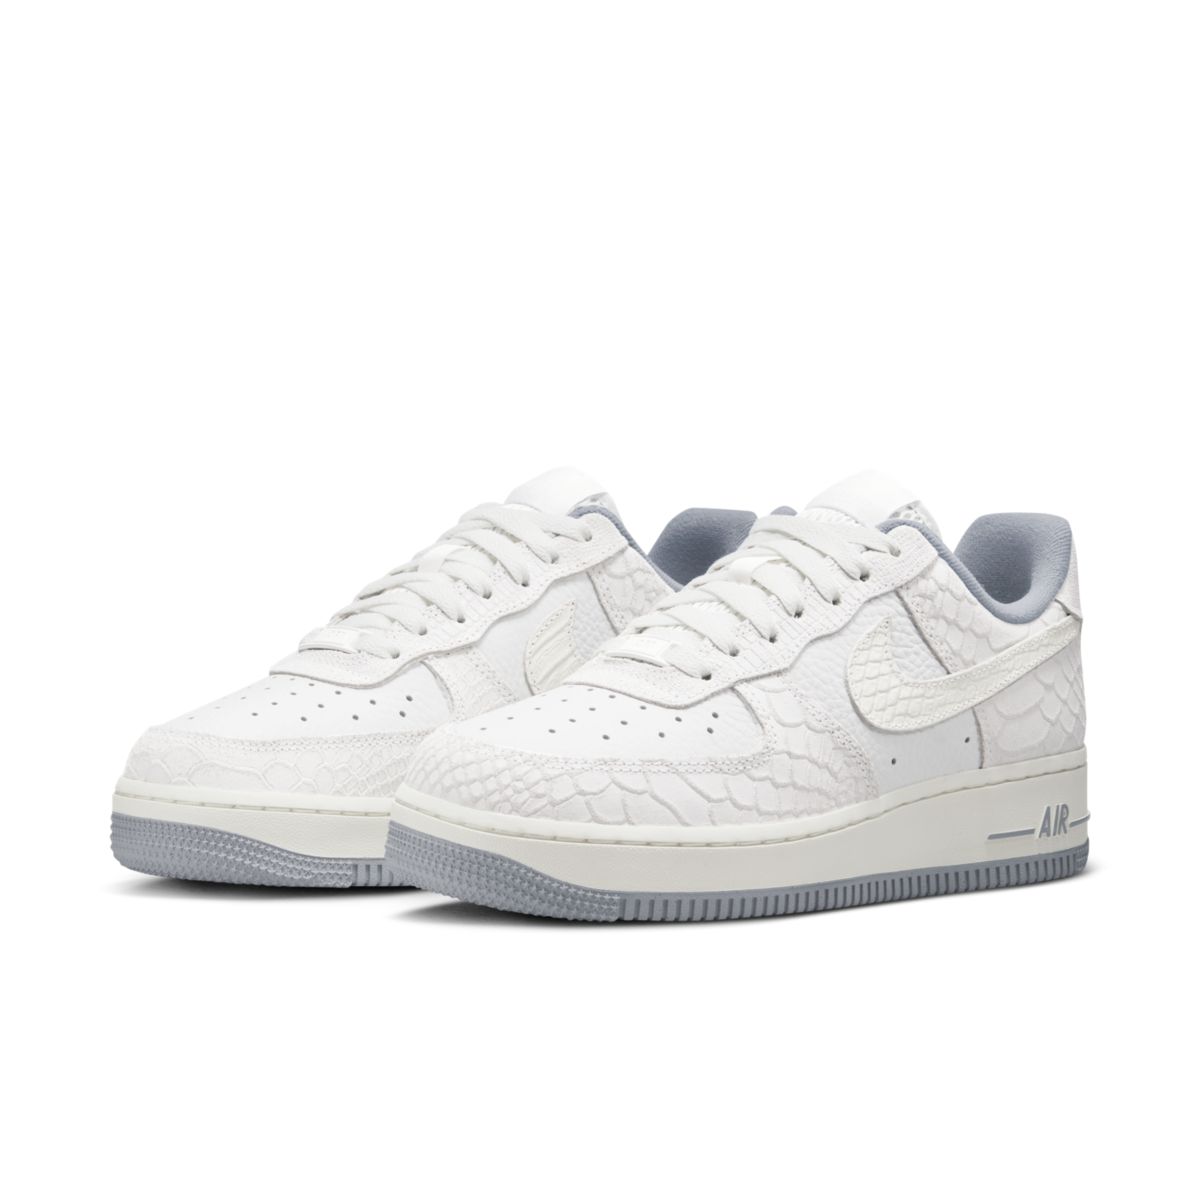 Nike Air Force 1 Low White Python DX2678-100 4